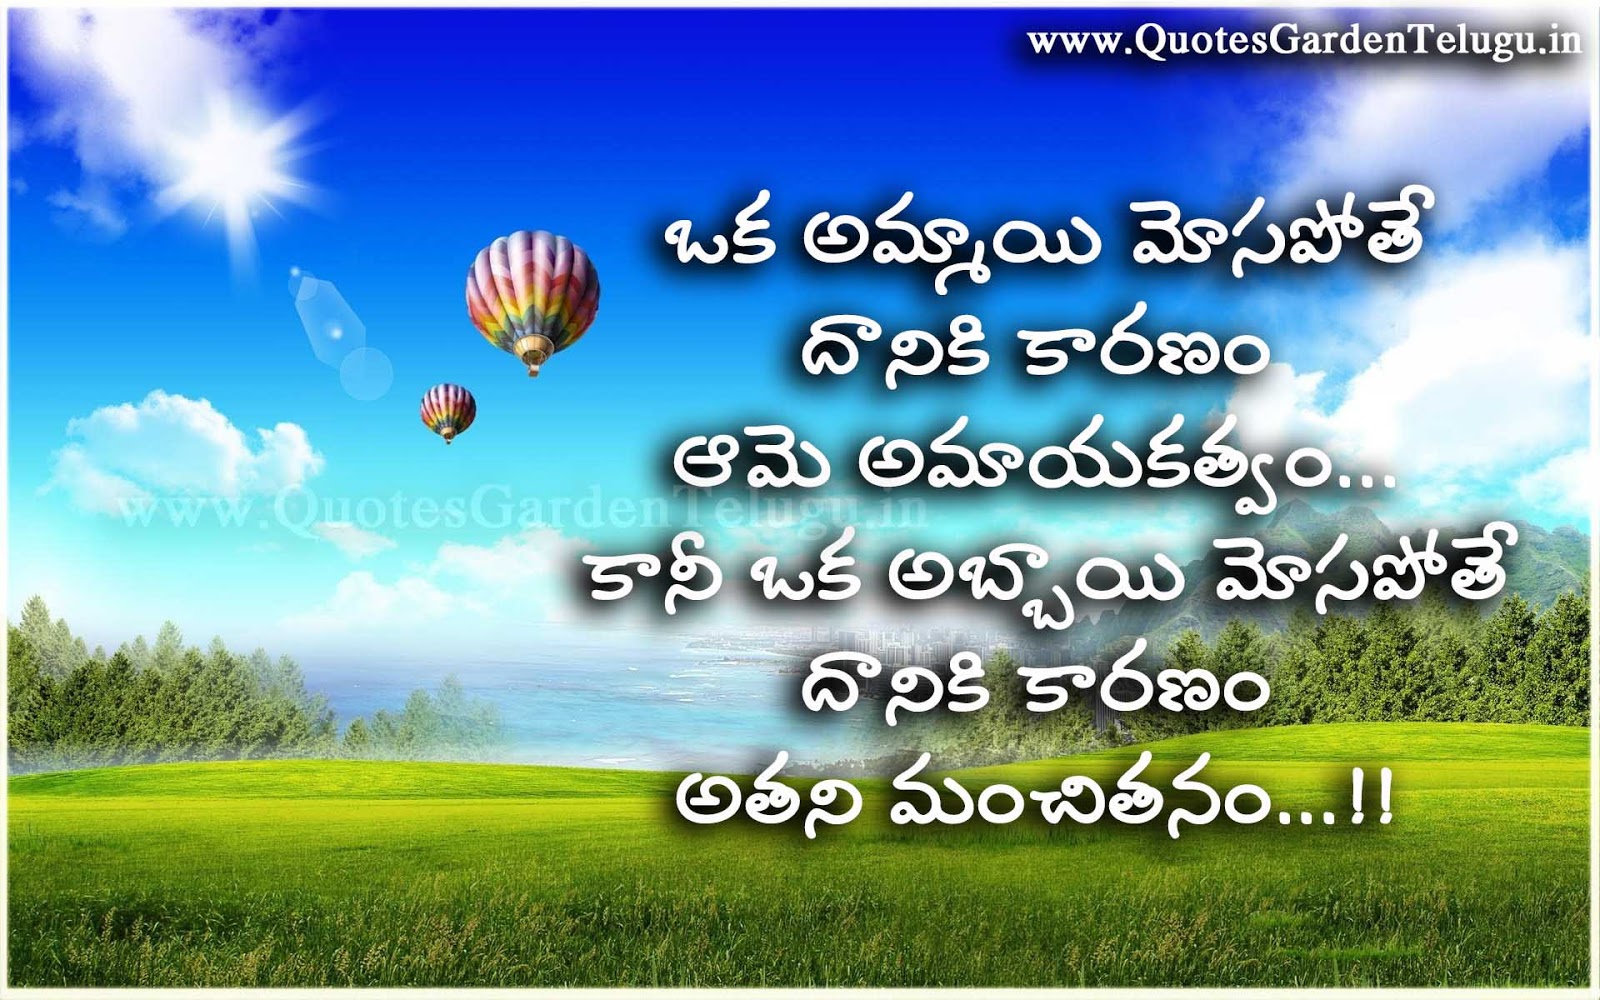 Telugu Love failure quotes for boys and girls | QUOTES GARDEN ...